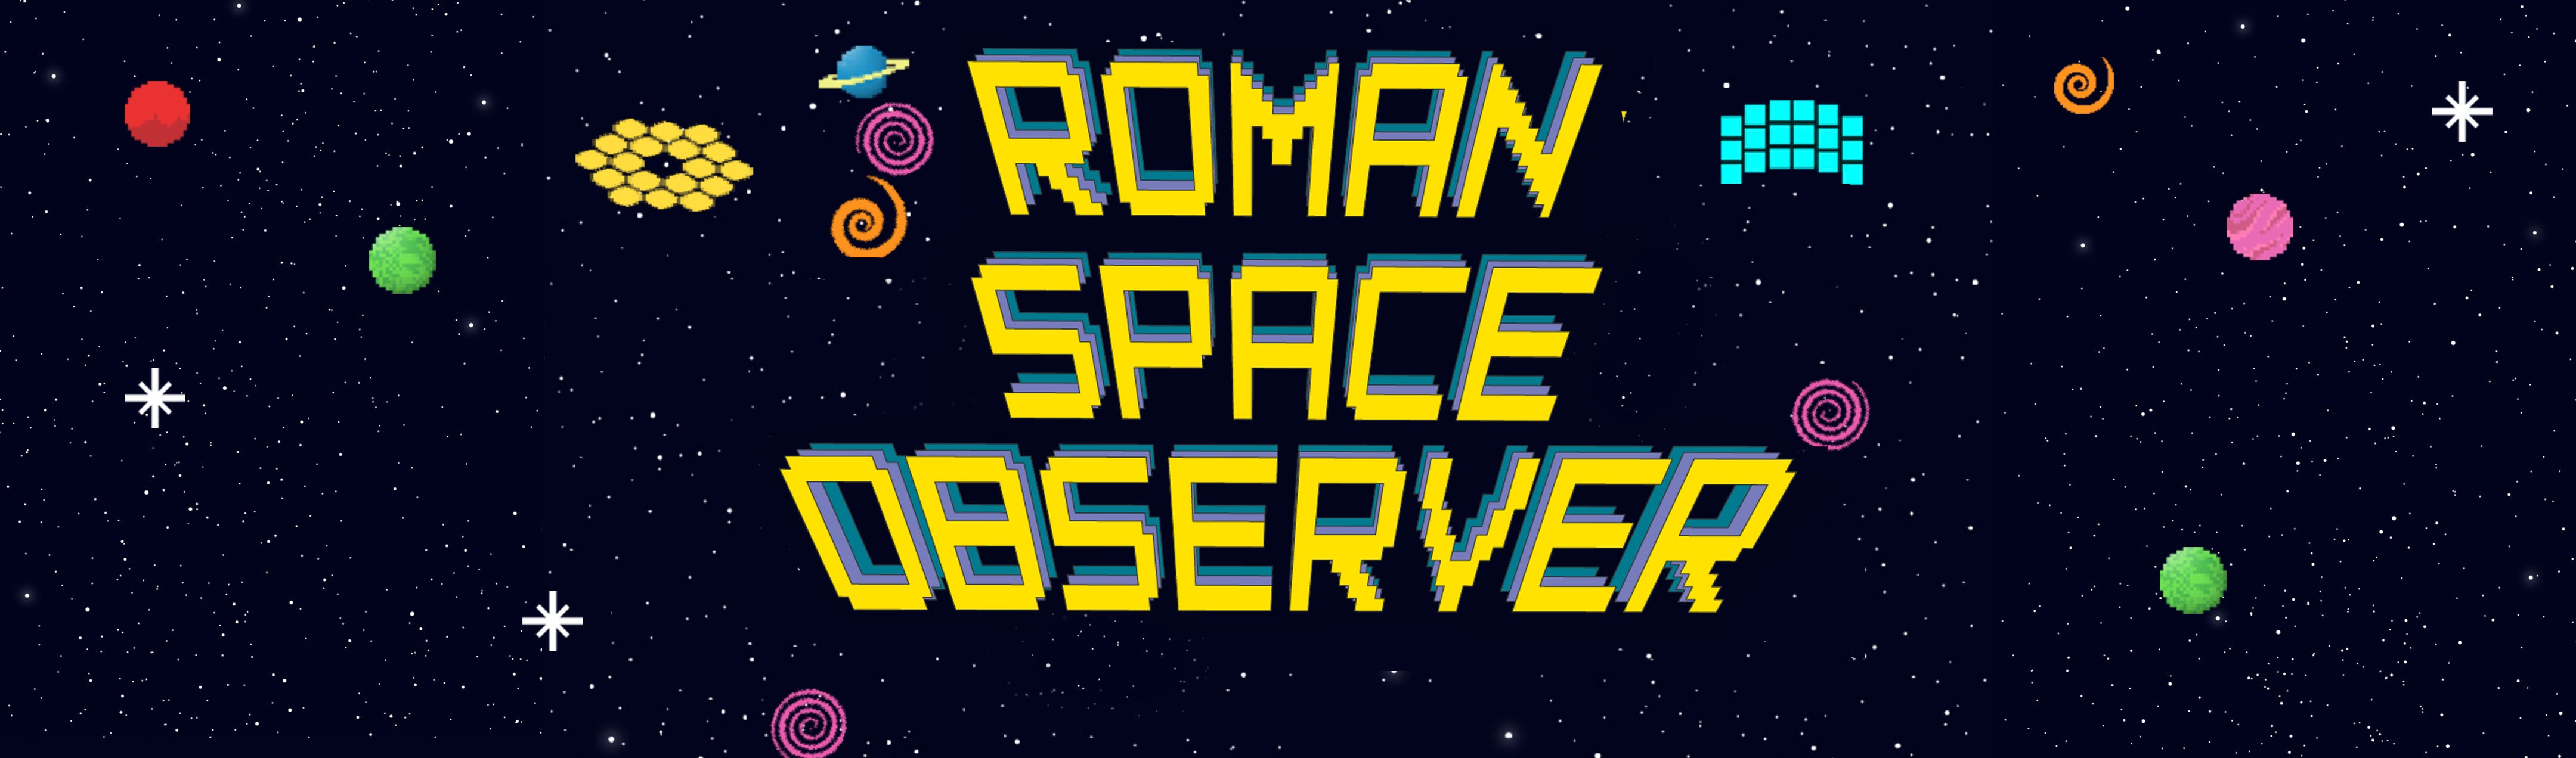 The Roman Observer game graphic banner